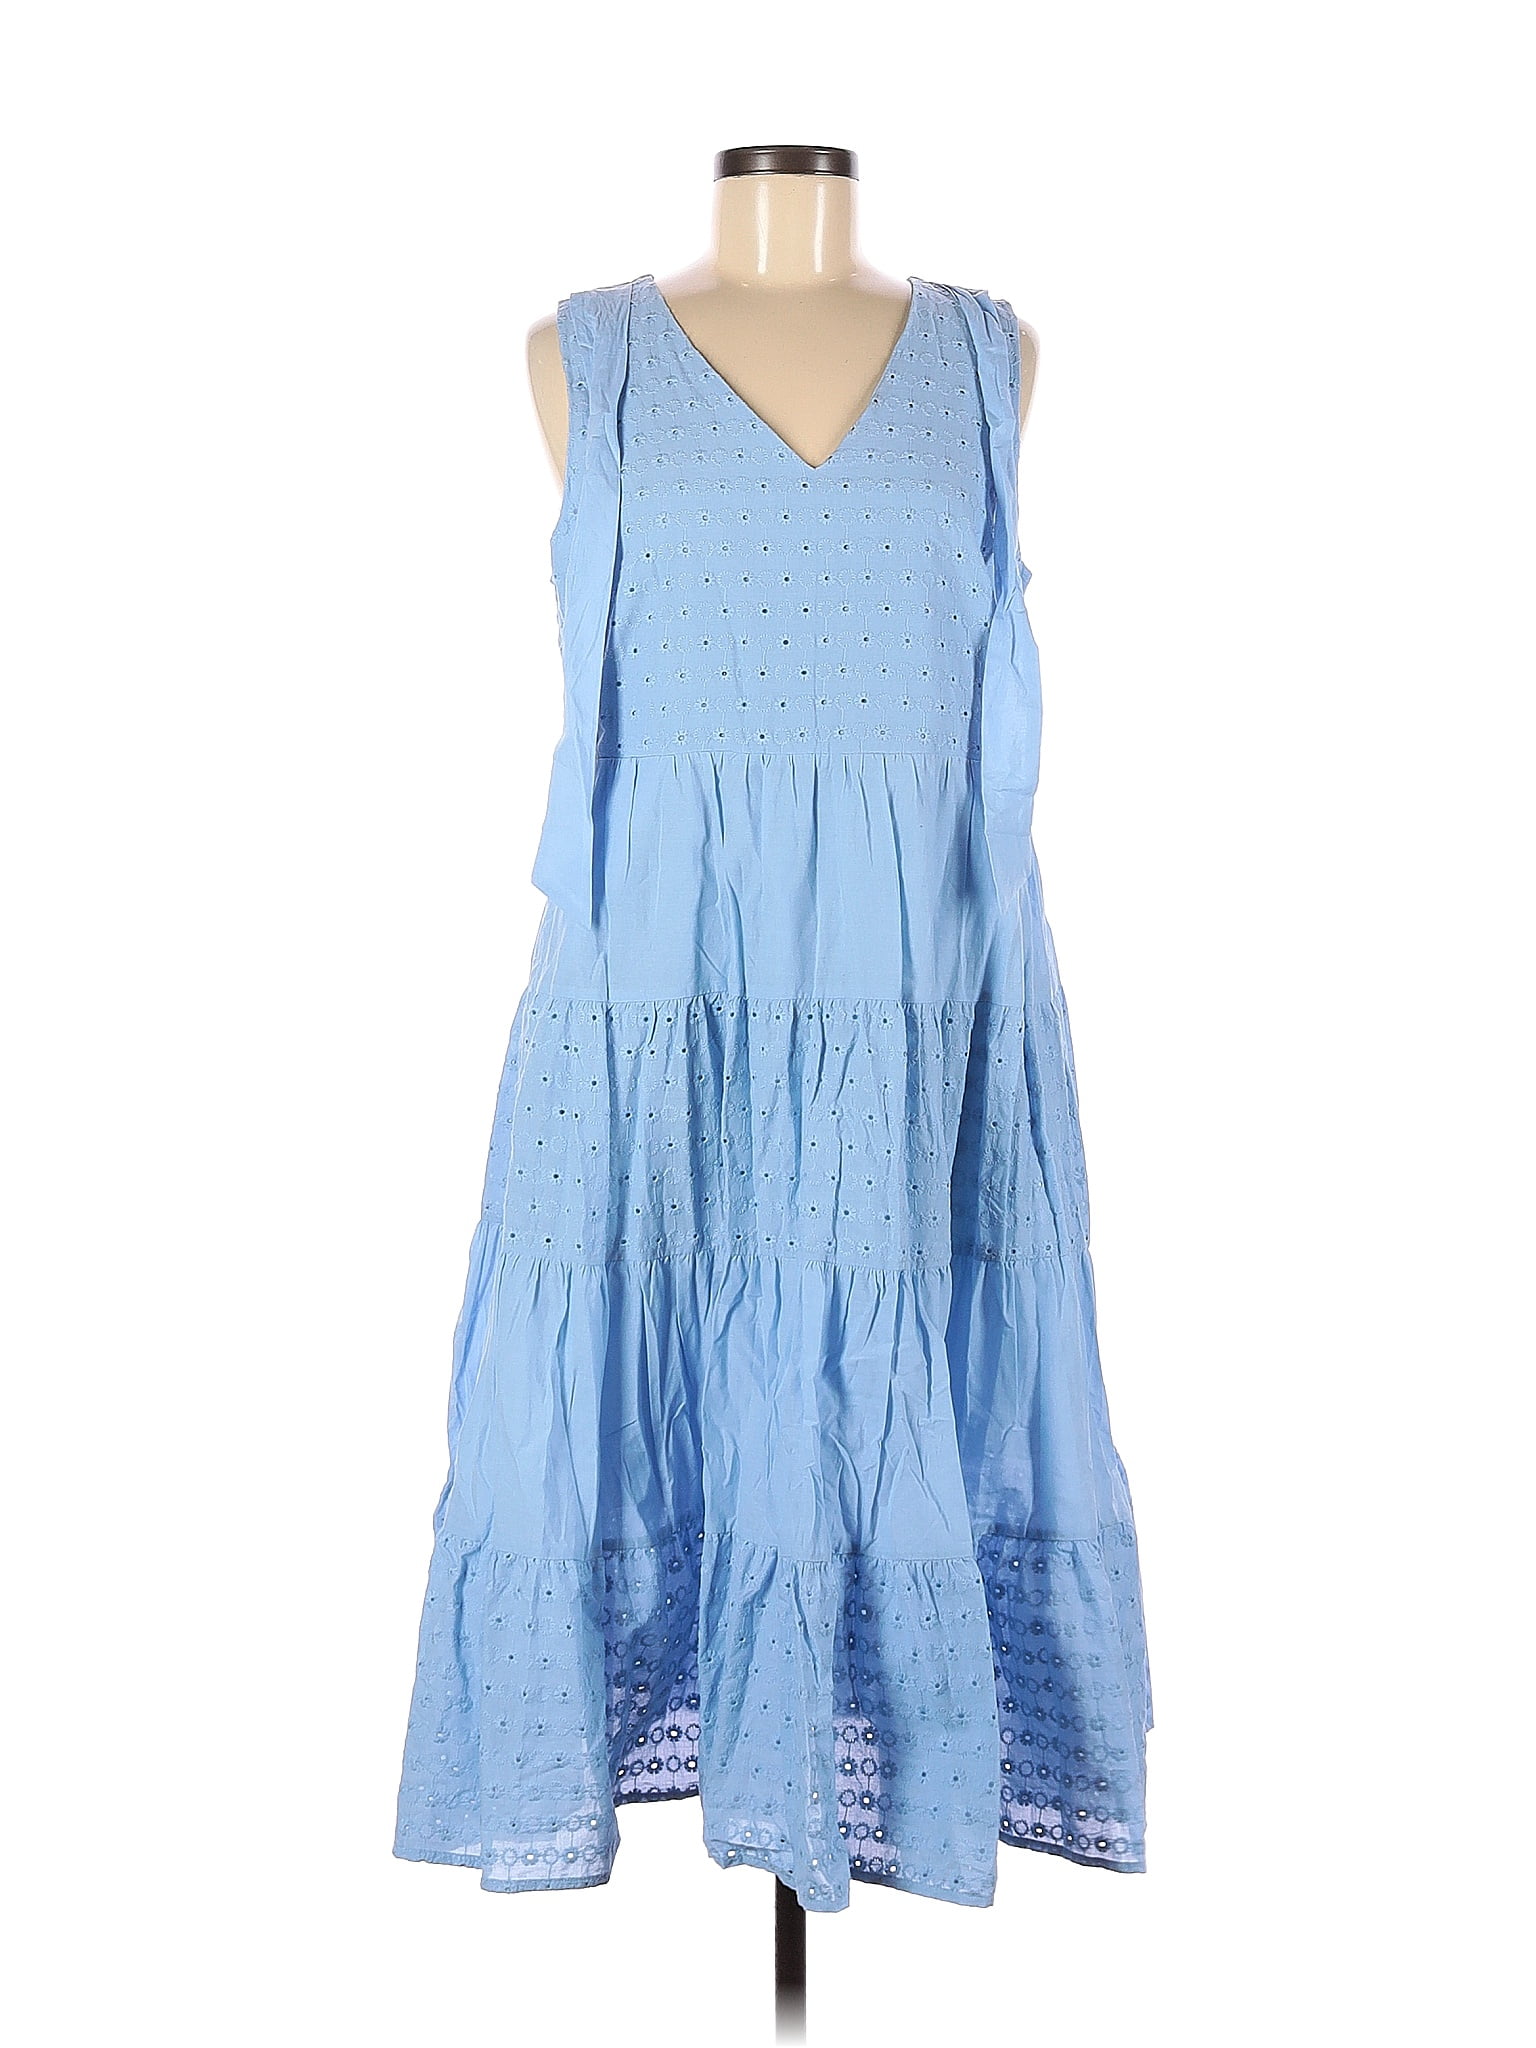 Marc New York Andrew Marc 100% Cotton Solid Blue Casual Dress Size M ...